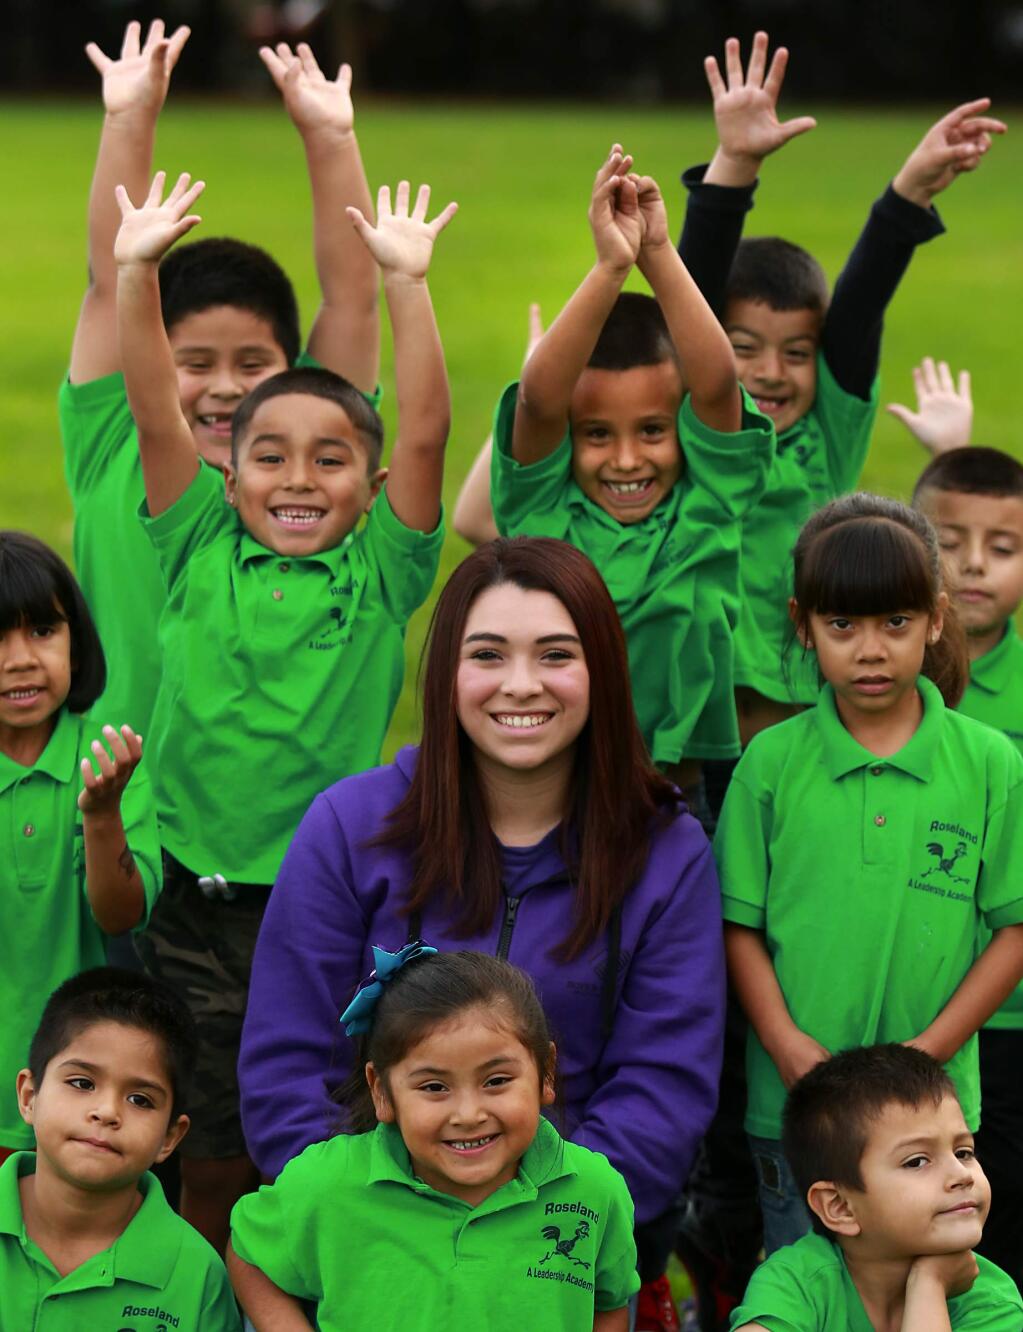 Teen face Maria Millagomez is on staff with the Boys and Girls Club at Roseland School in Santa Rosa.